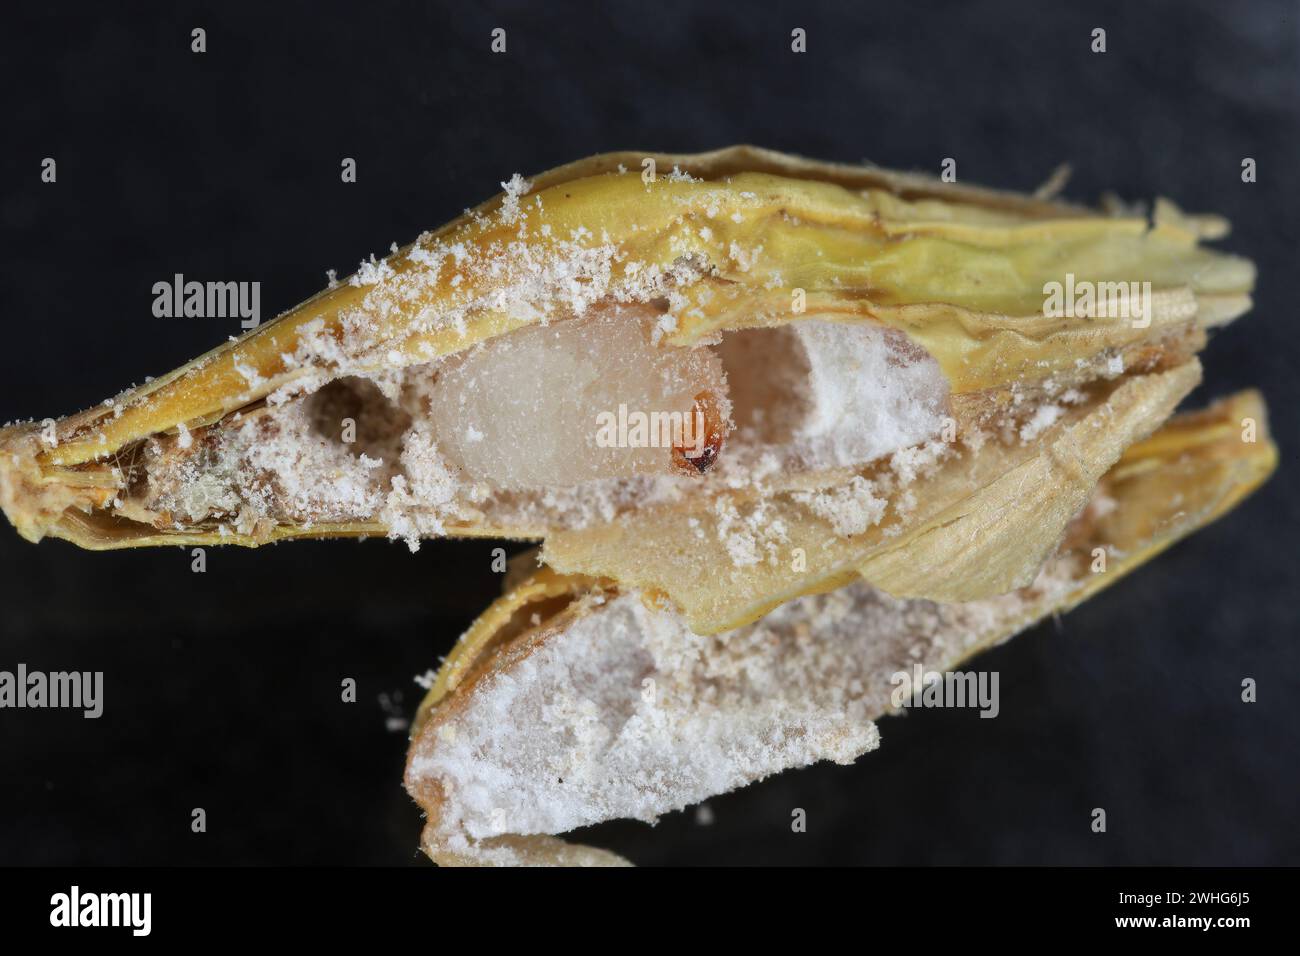 Rice weevil, or science names Sitophilus oryzae. Larvae developing inside the grain. Stock Photo